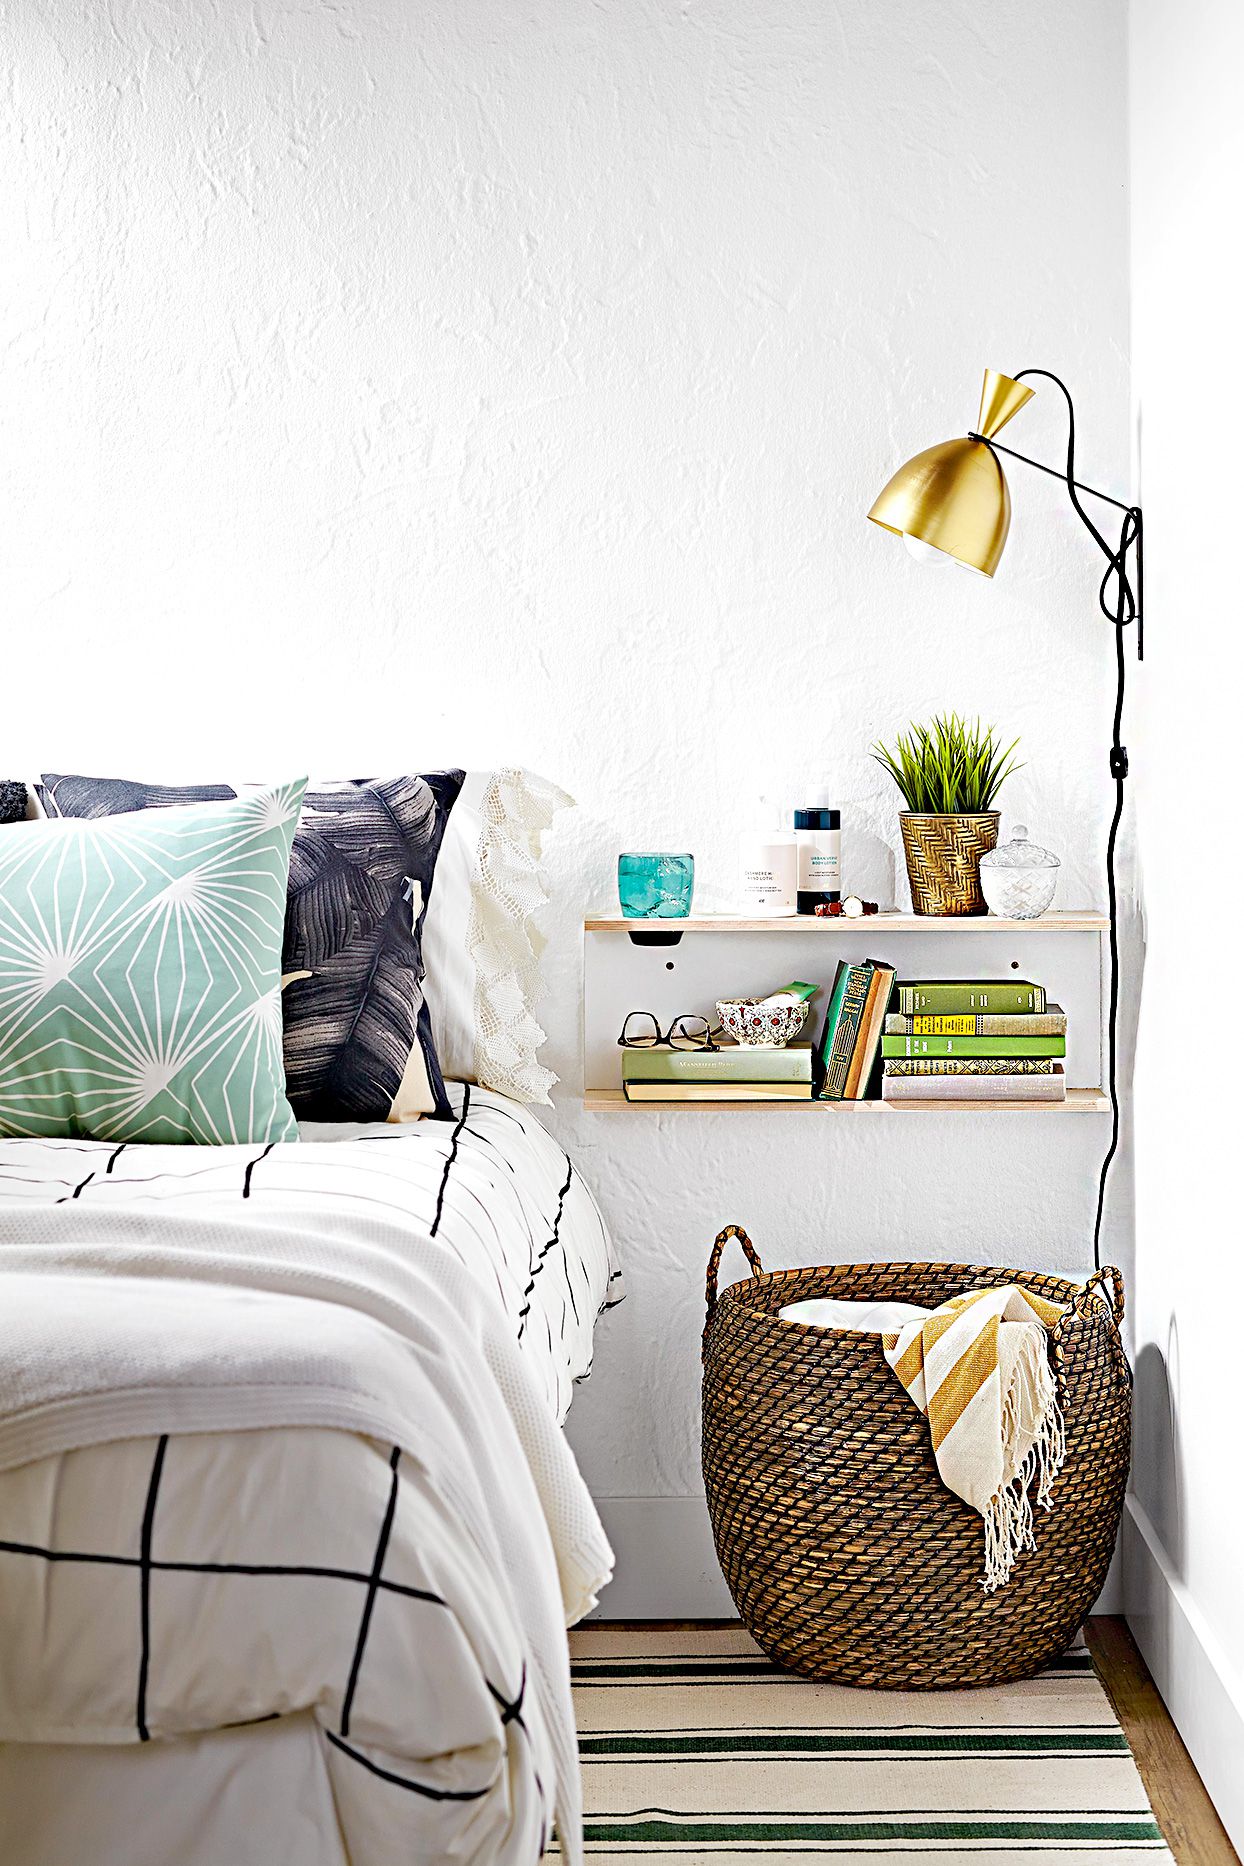 How to declutter a nightstand – for a clutter-free sleep space